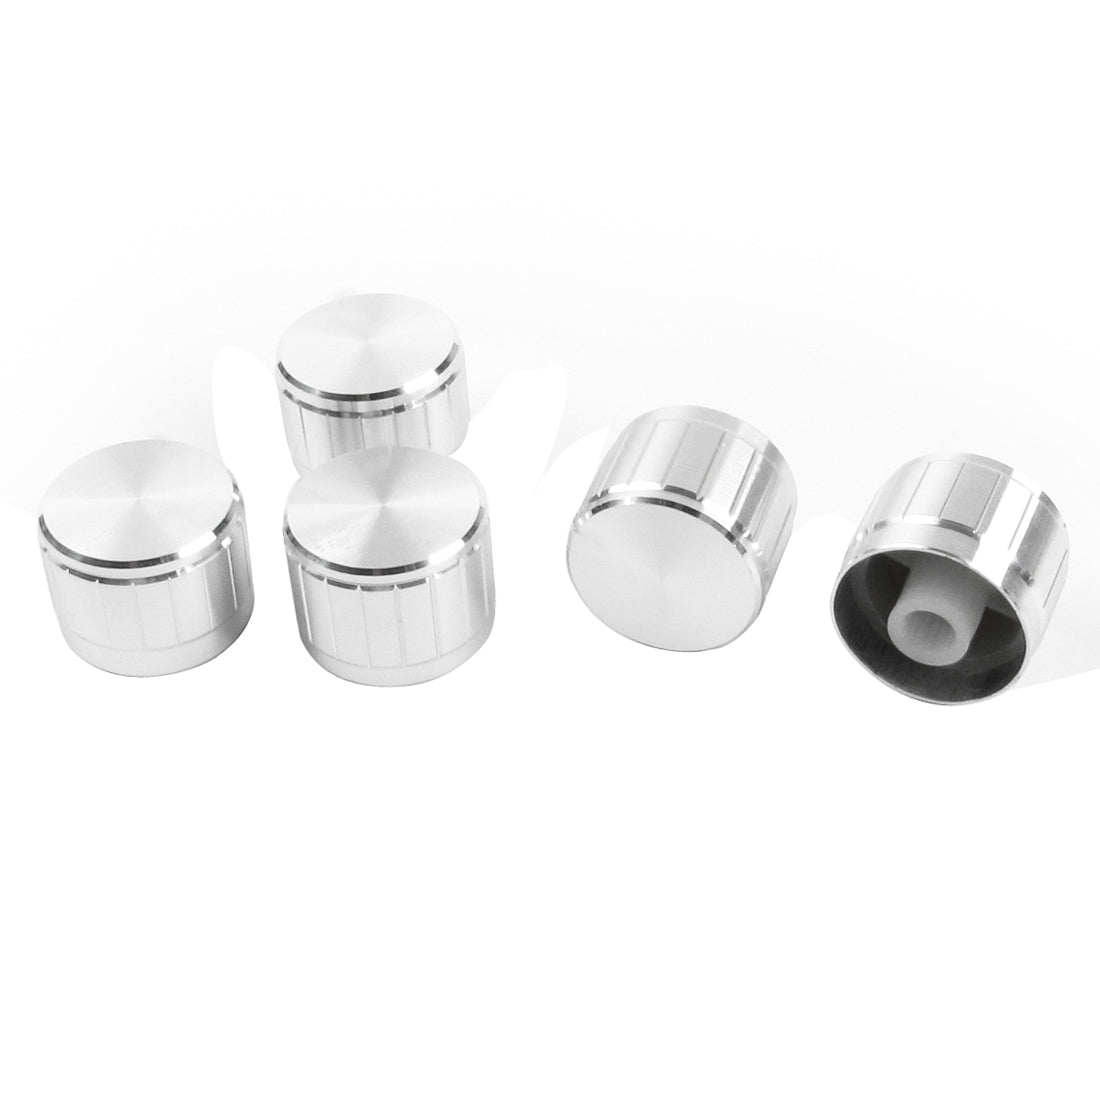 uxcell Uxcell 5pcs Ribbed Grip Potentiometer Rotary Knobs Caps 6mm Dia. Hole Silver Tone